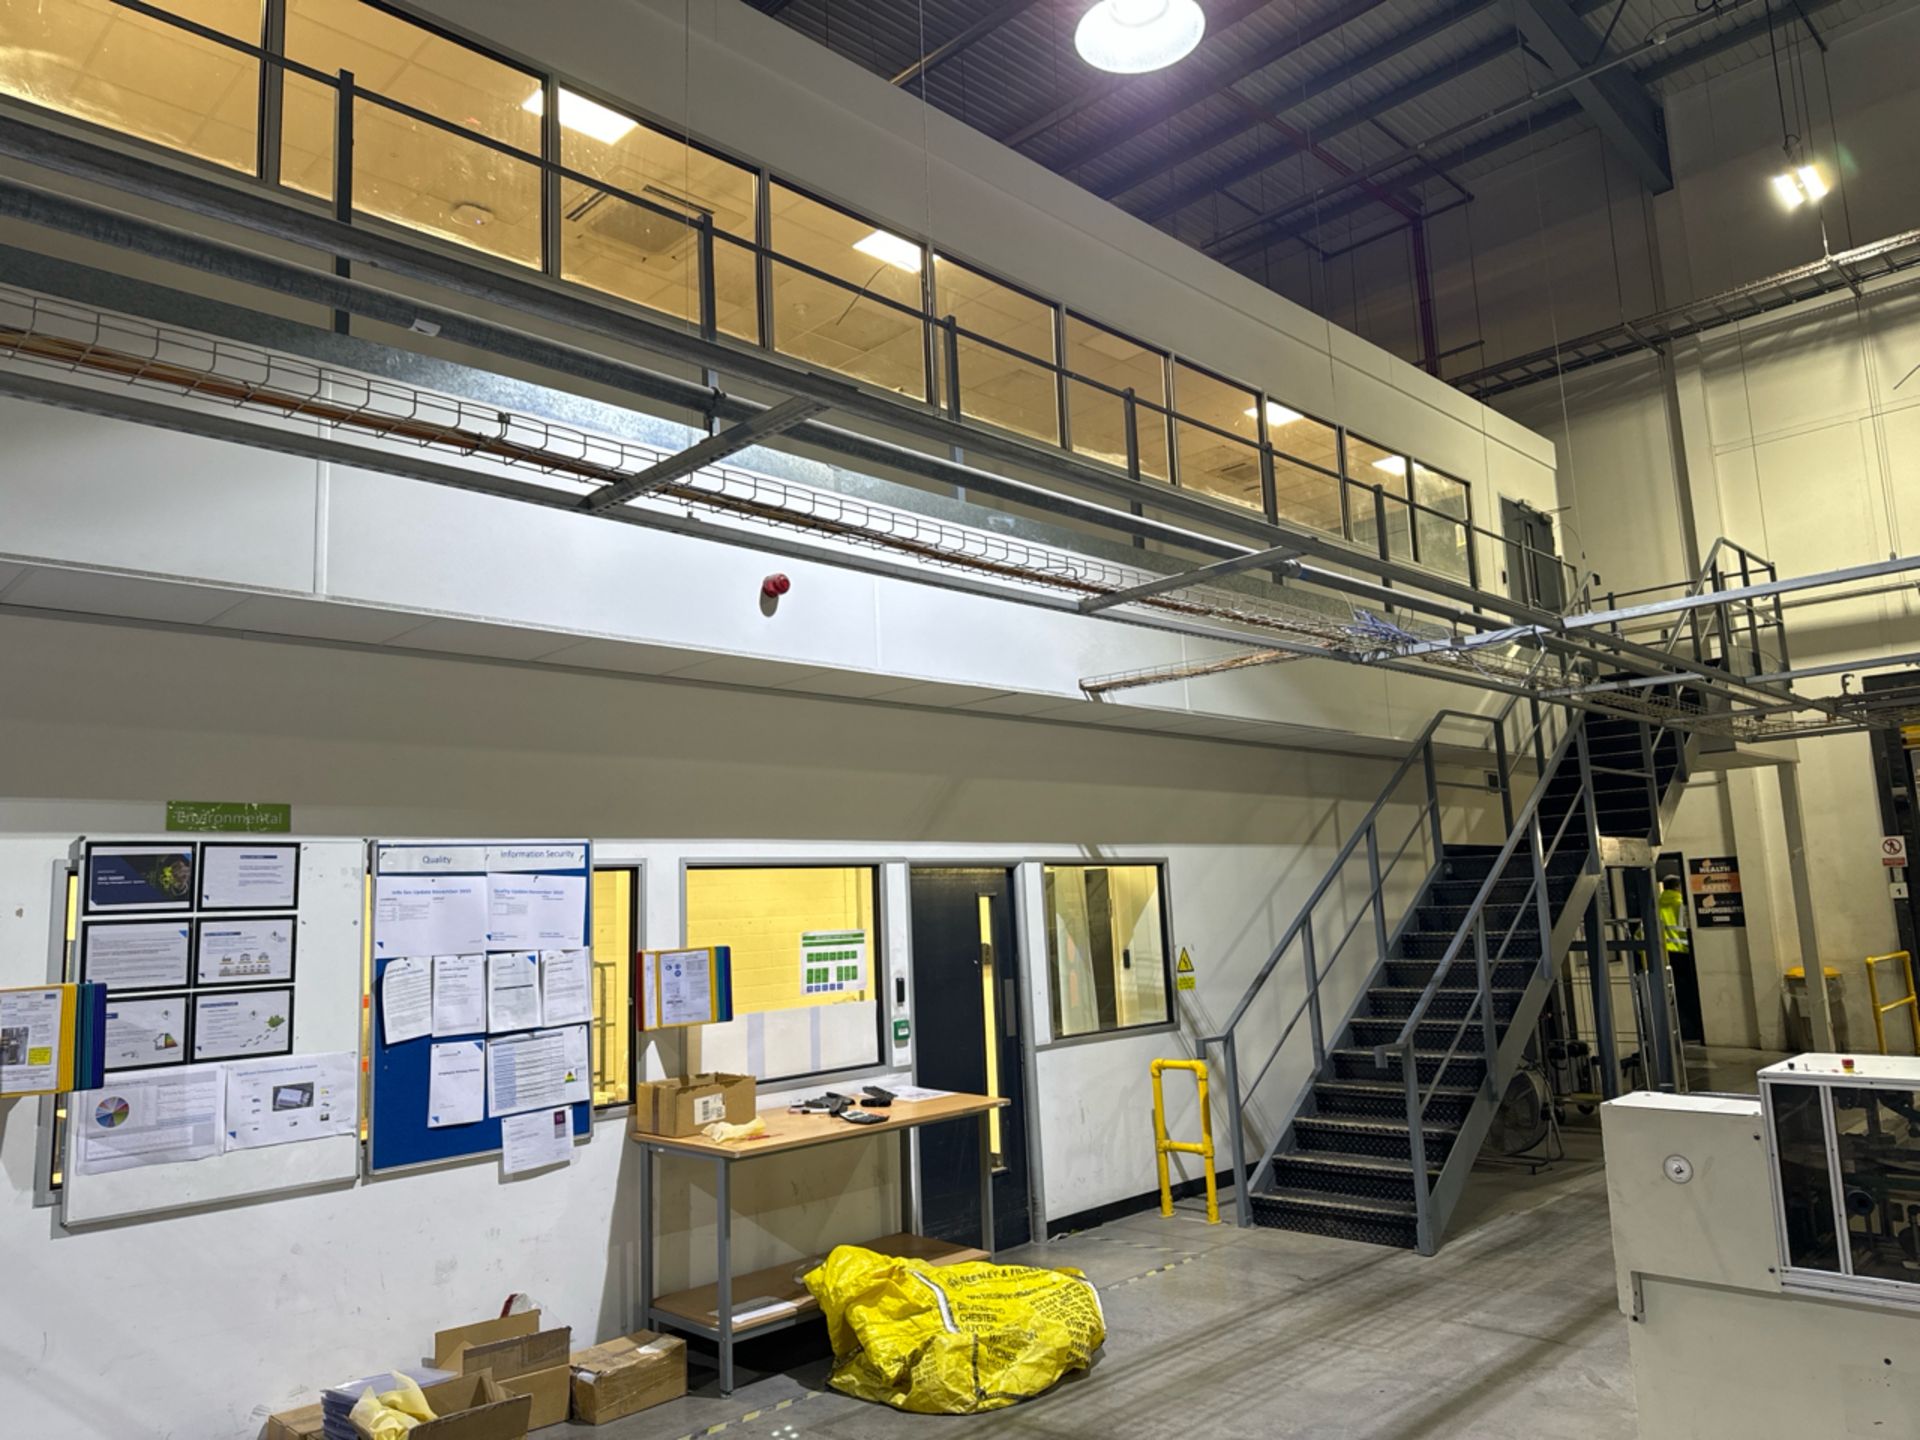 Two Story Mezzanine Floor and Offices - Image 3 of 12